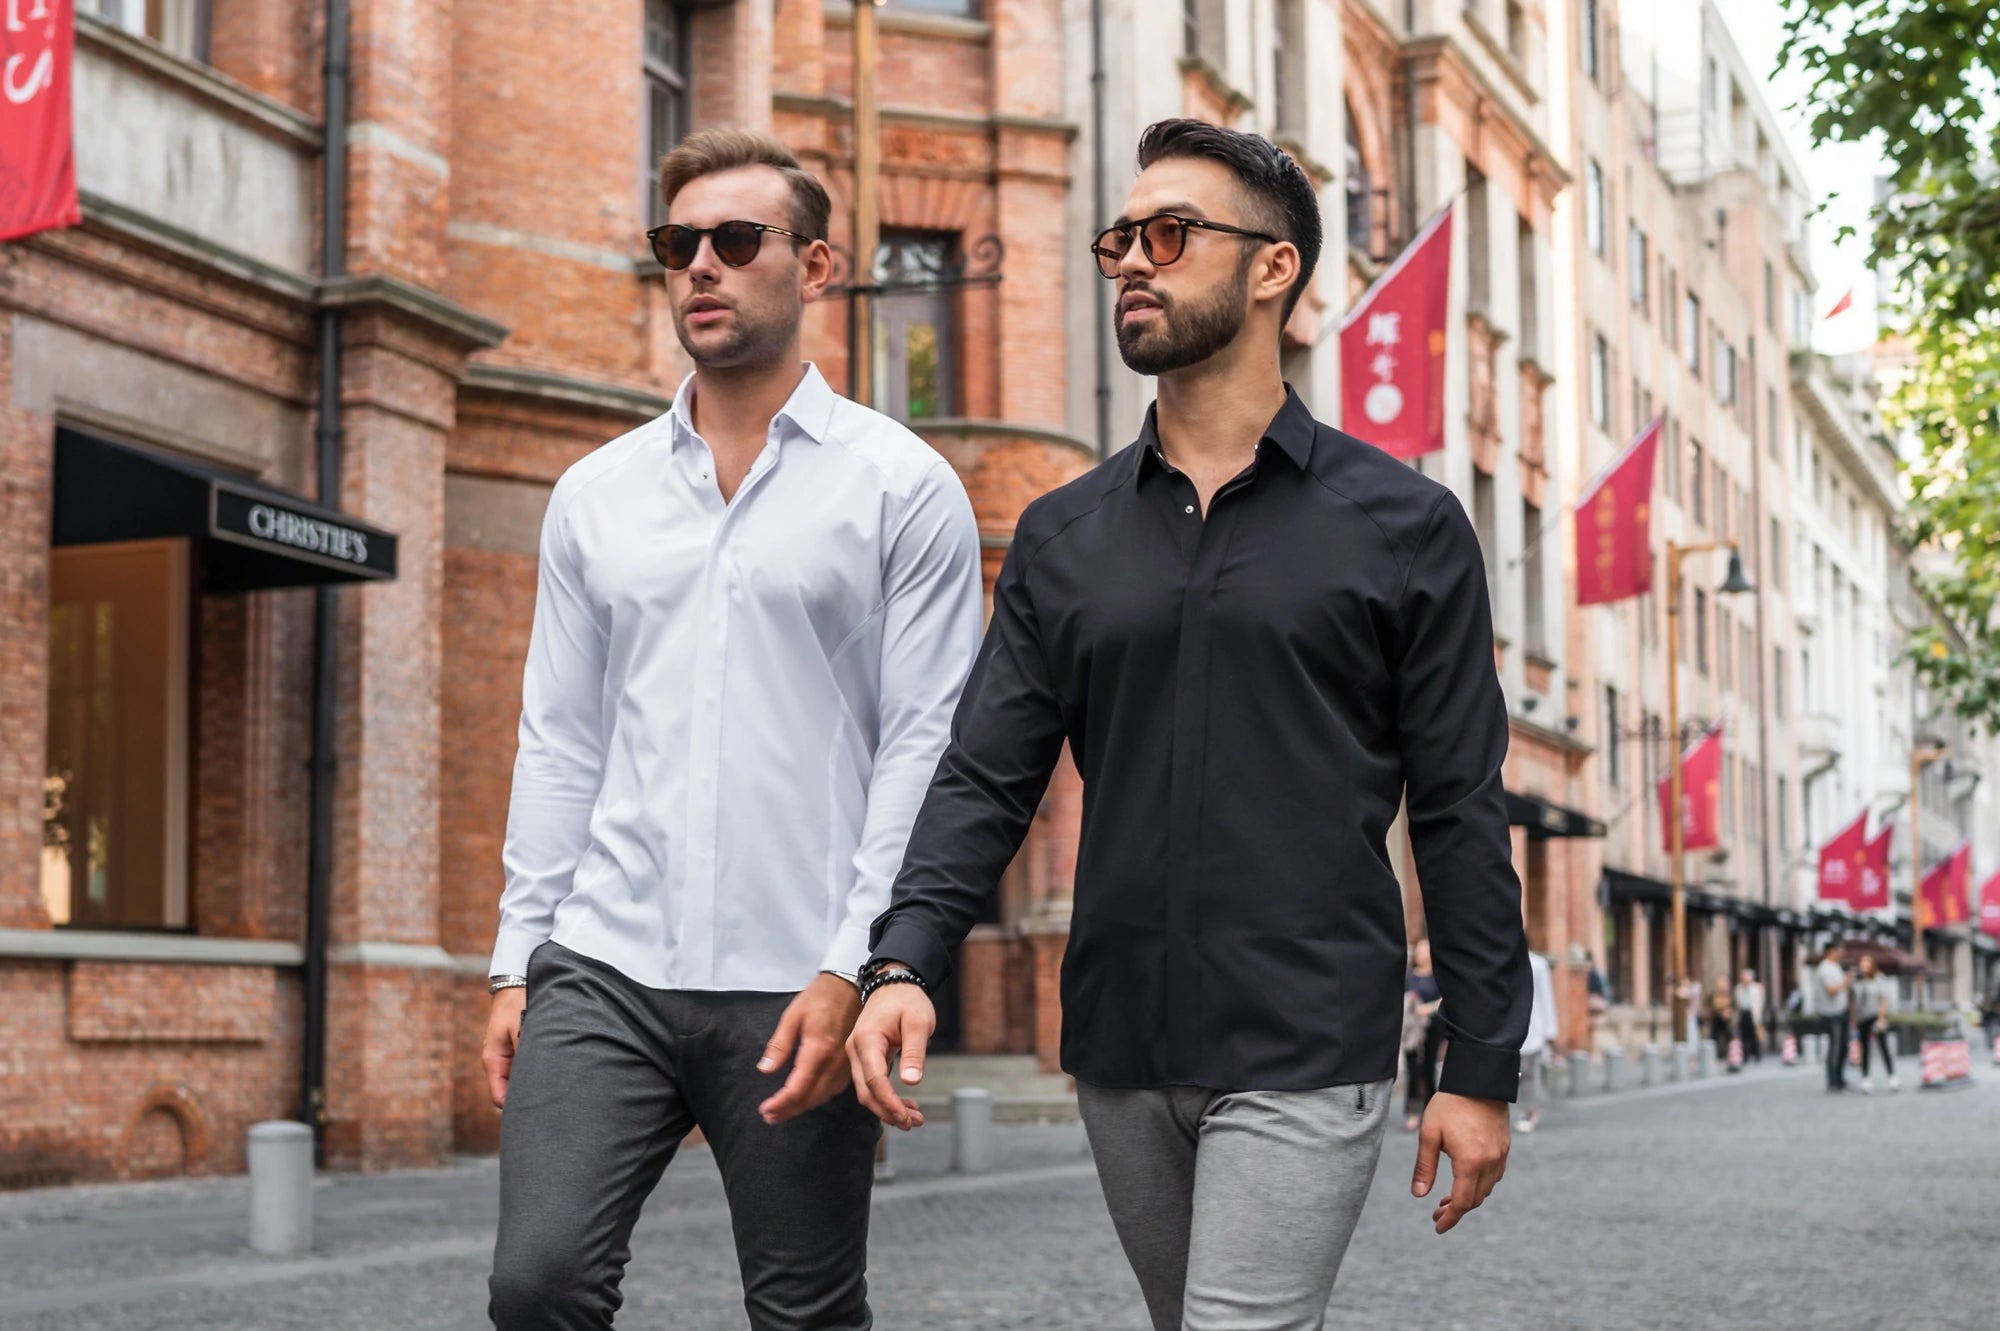 The Versatility of a Dress Shirt – How to Change Between Formal and Casual